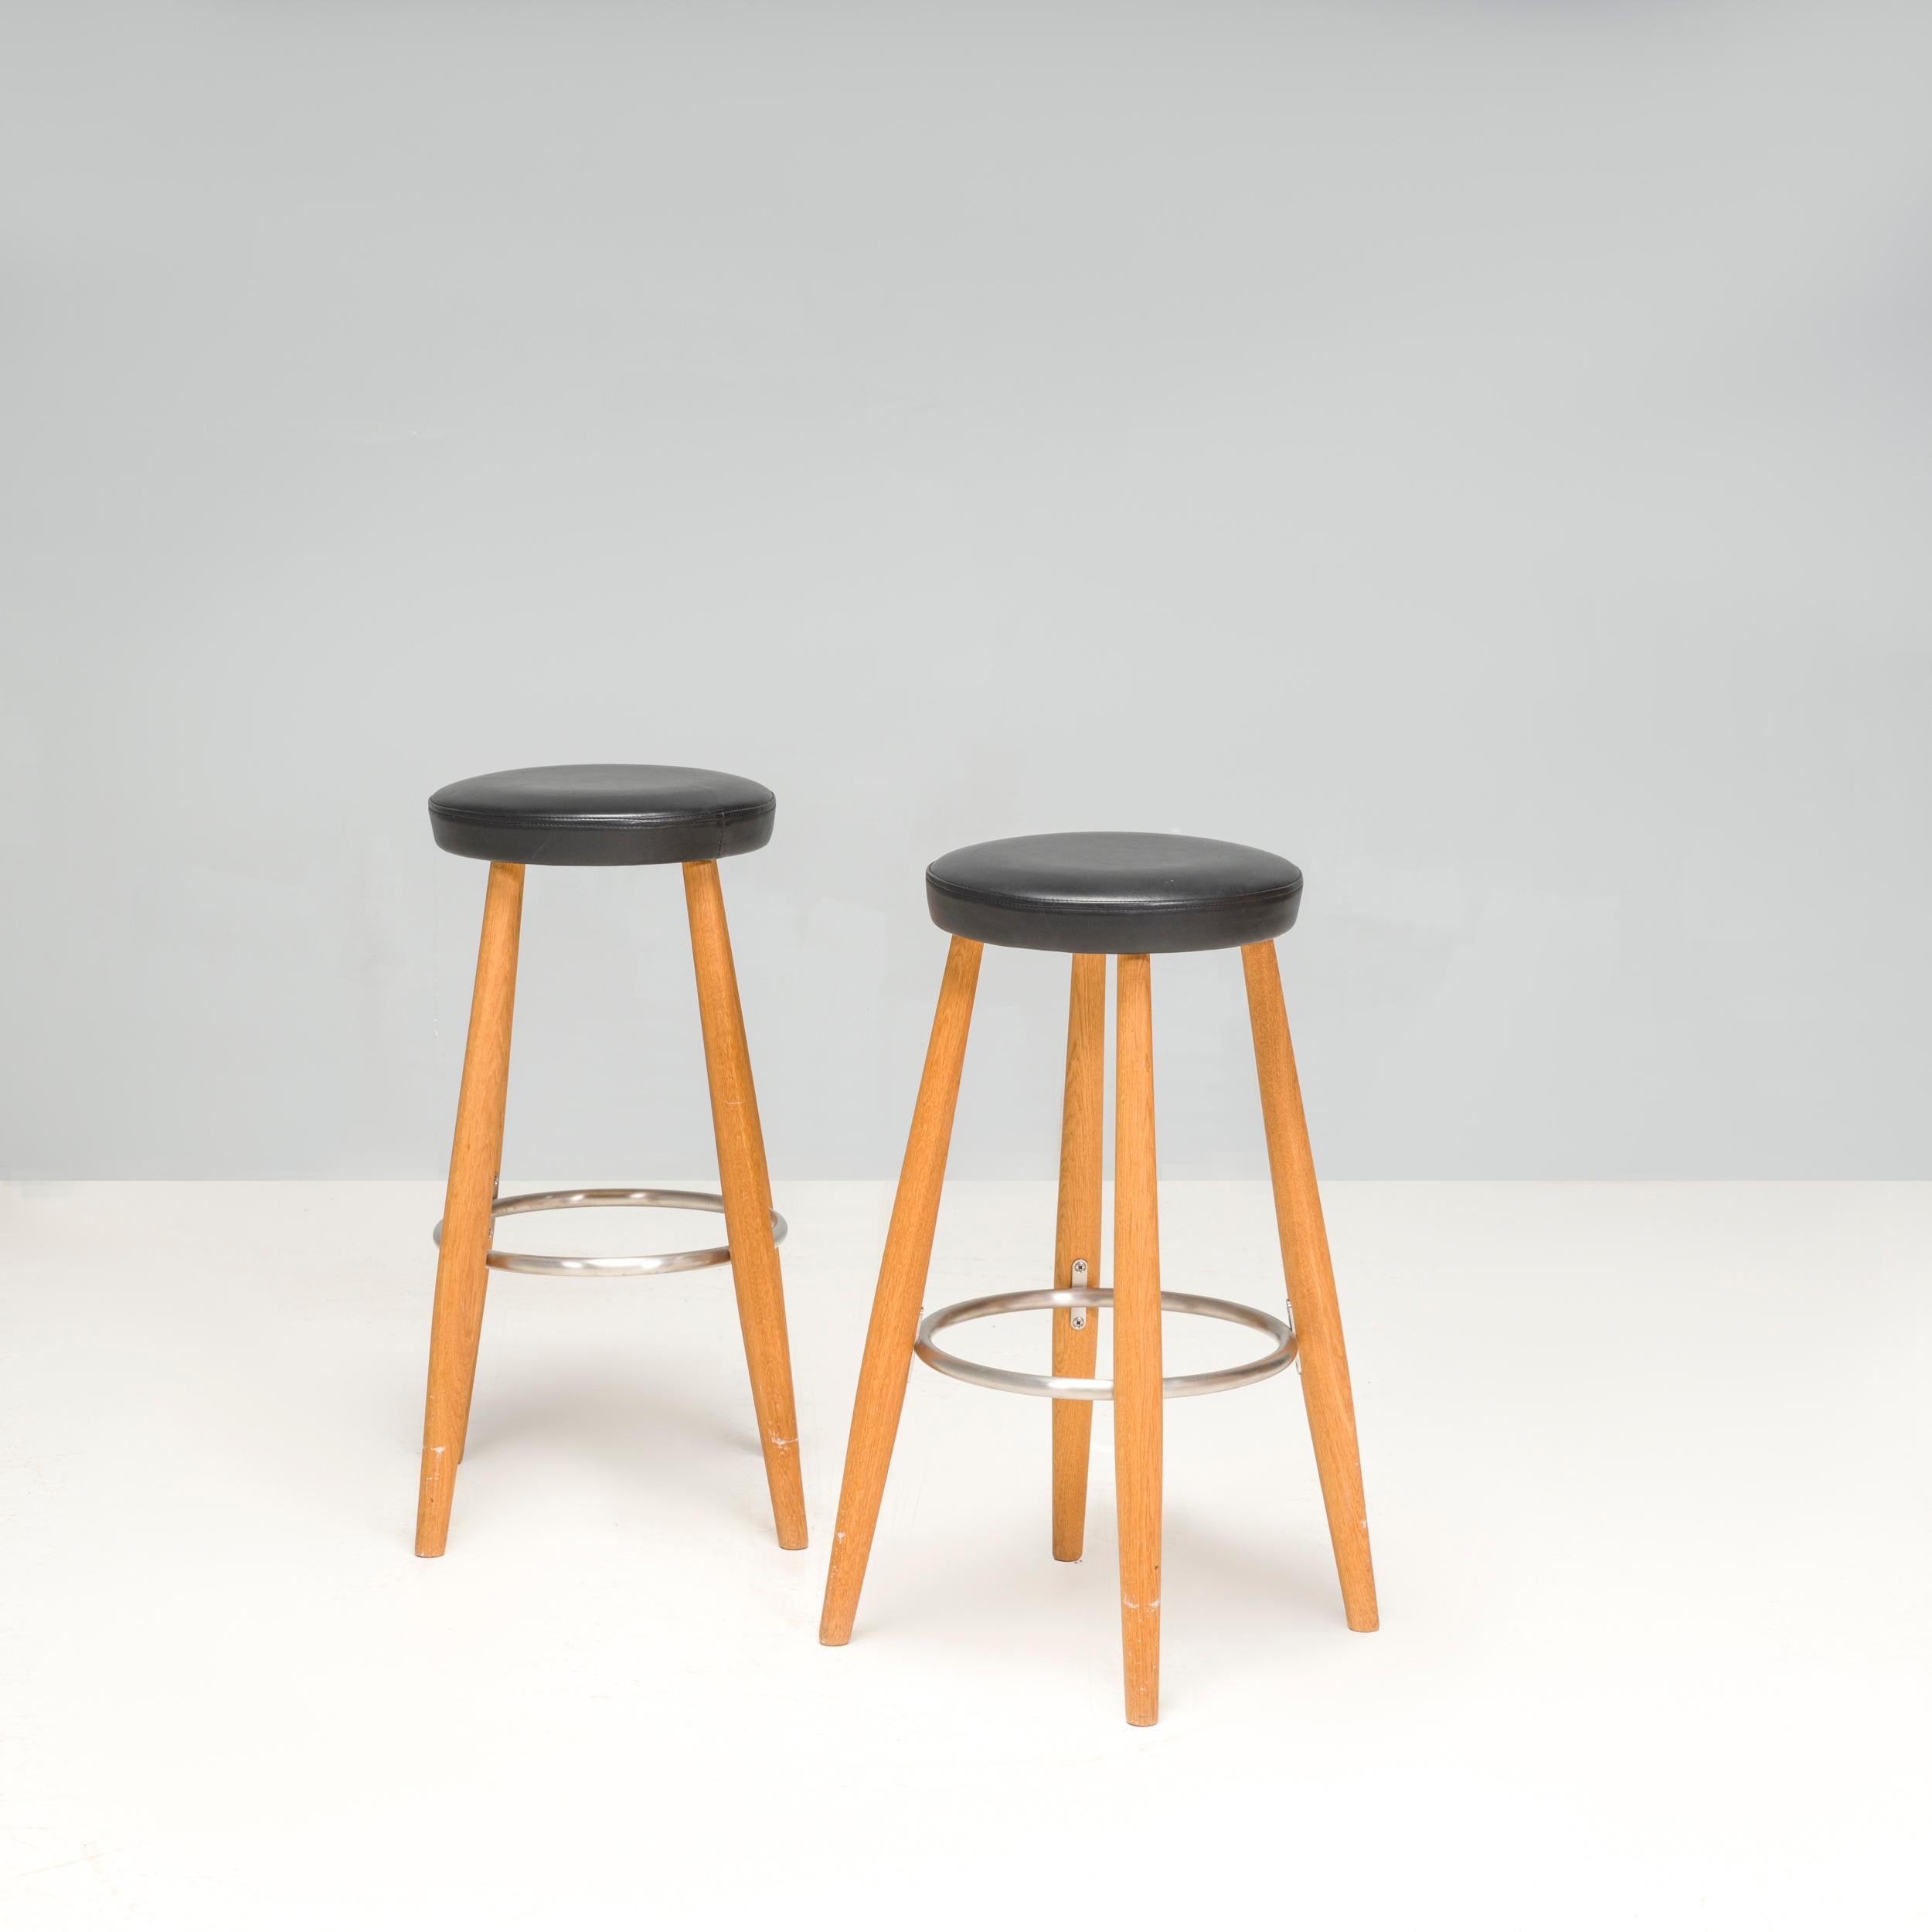 Originally designed by Hans J. Wegner in 1985, this set of CH56 stools was manufactured by Carl Hansen in 2008.

One of Wegner’s most iconic seating designs, the bar stool is constructed from four solid oak legs which are slightly angled and held in